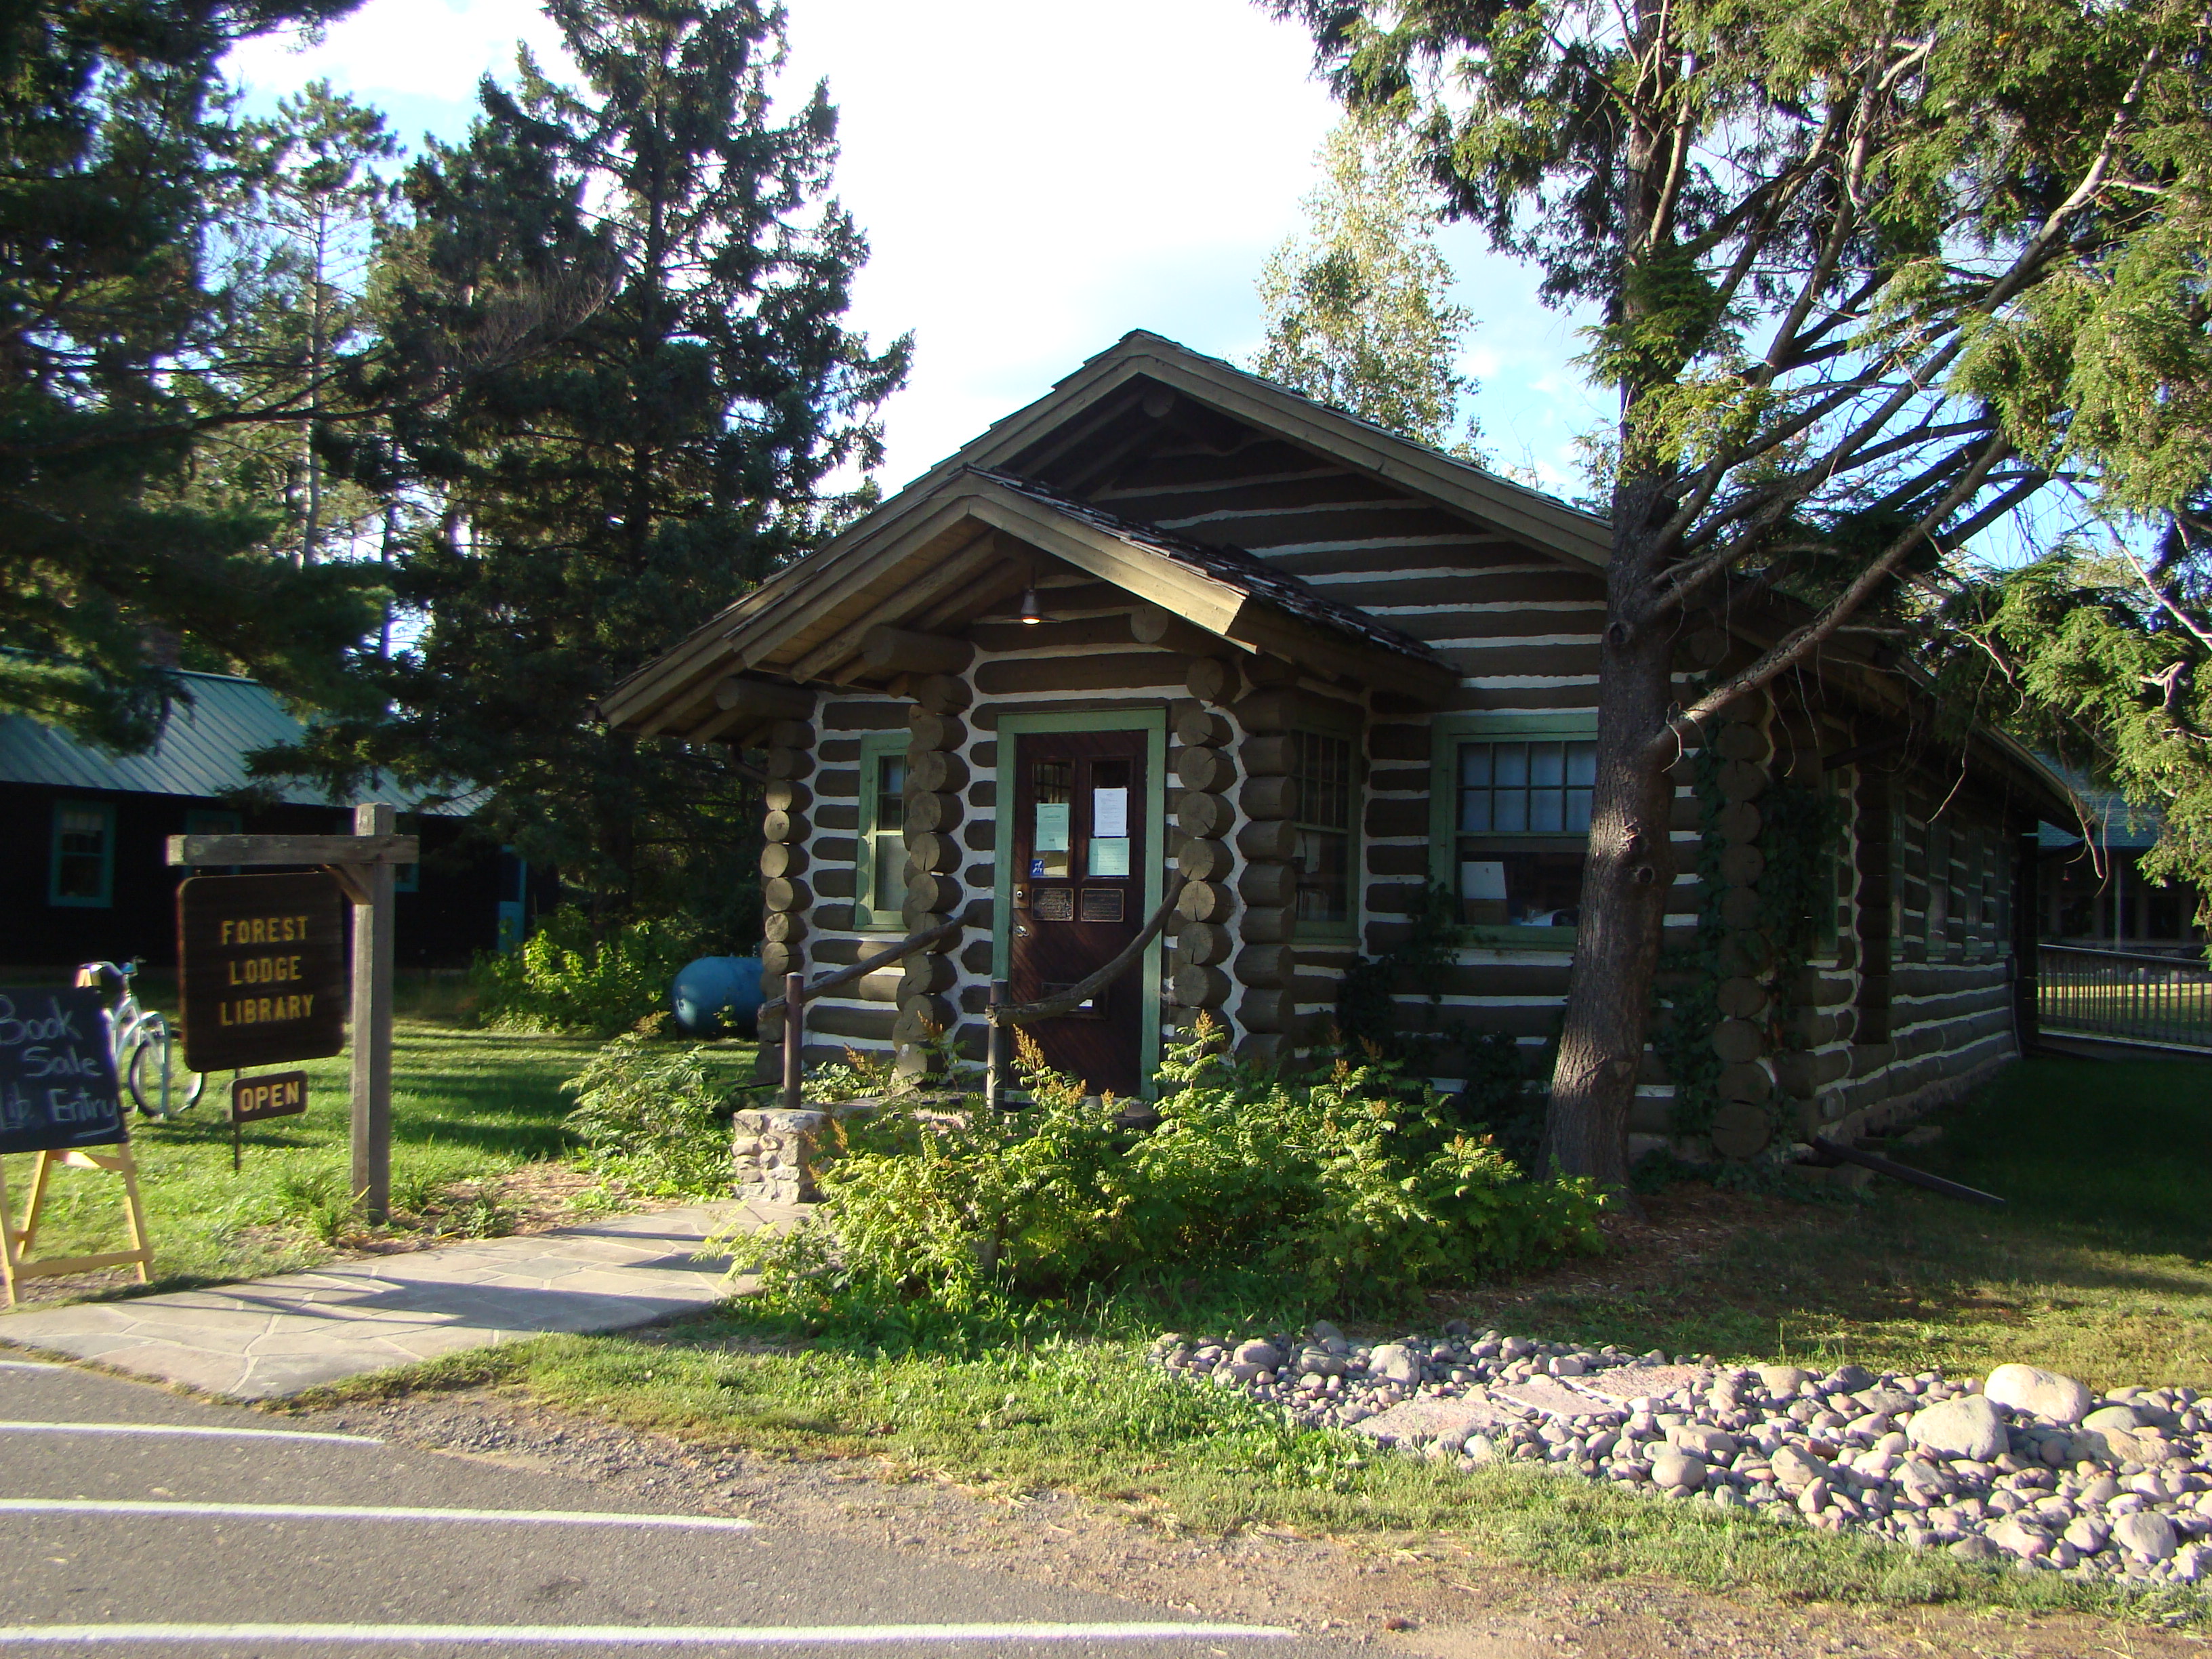 File:Forest Lodge Library.JPG - Wikimedia Commons